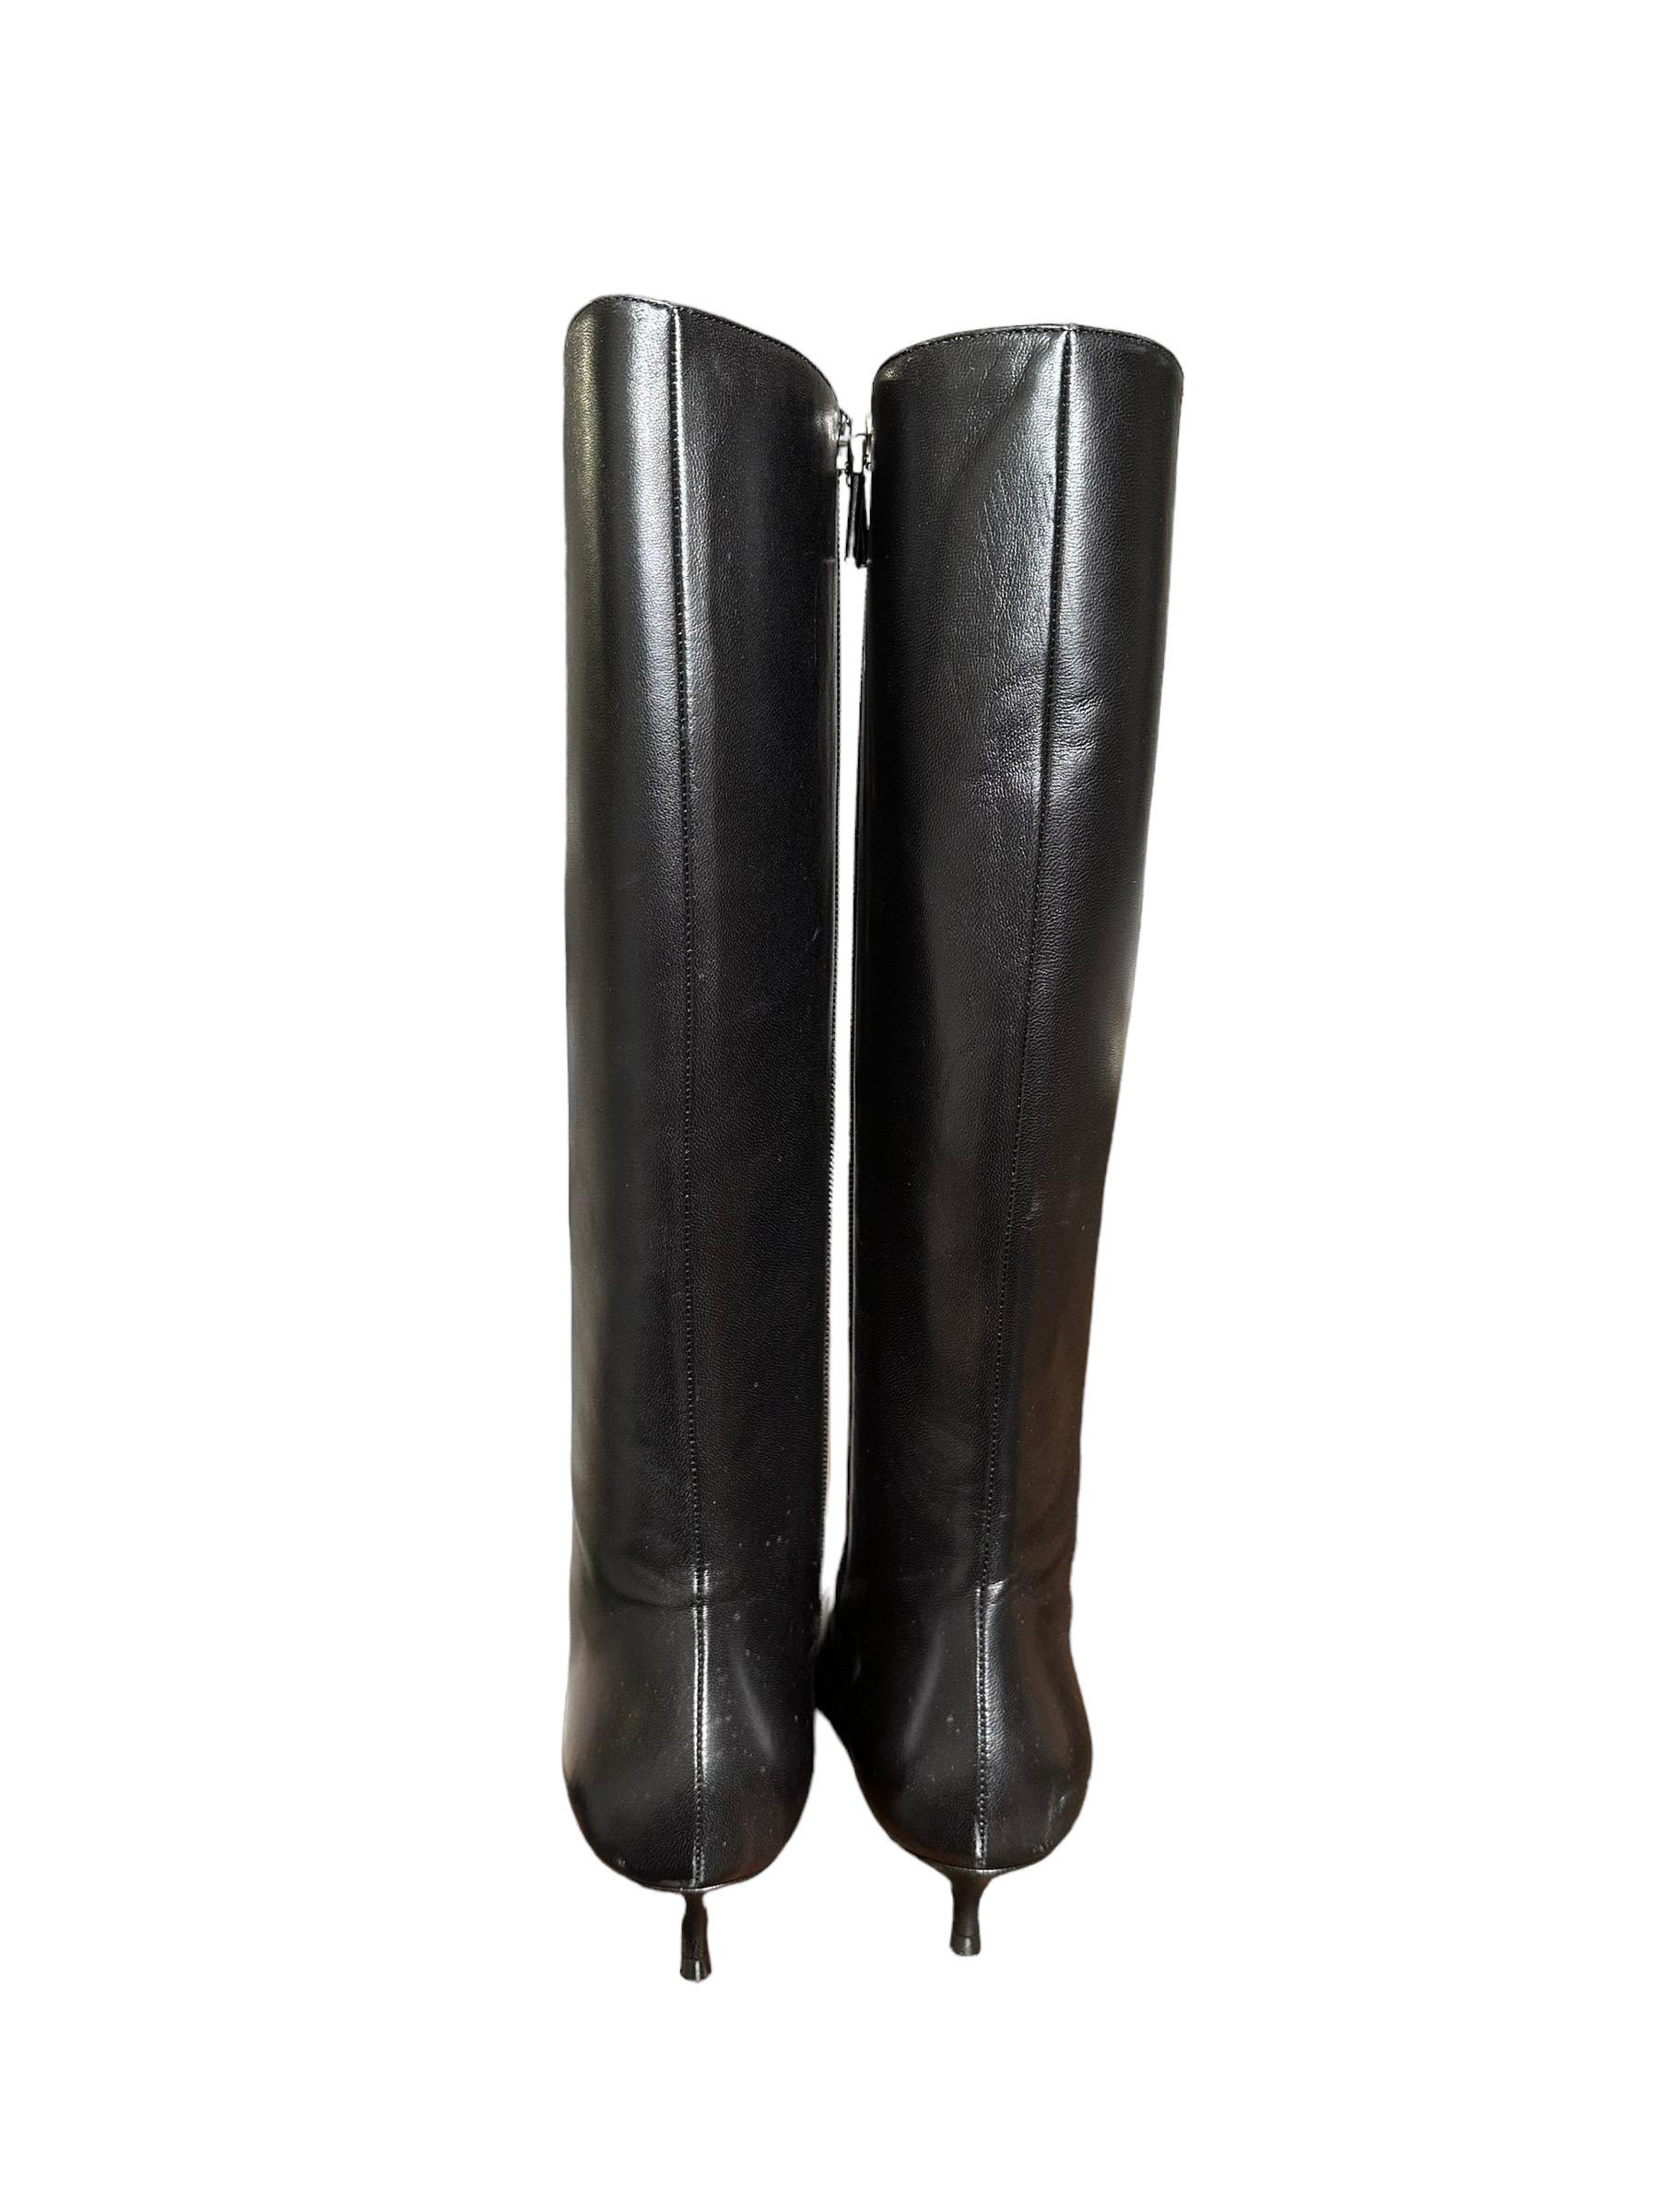 Dior Boots Black Leather Low Heels 3